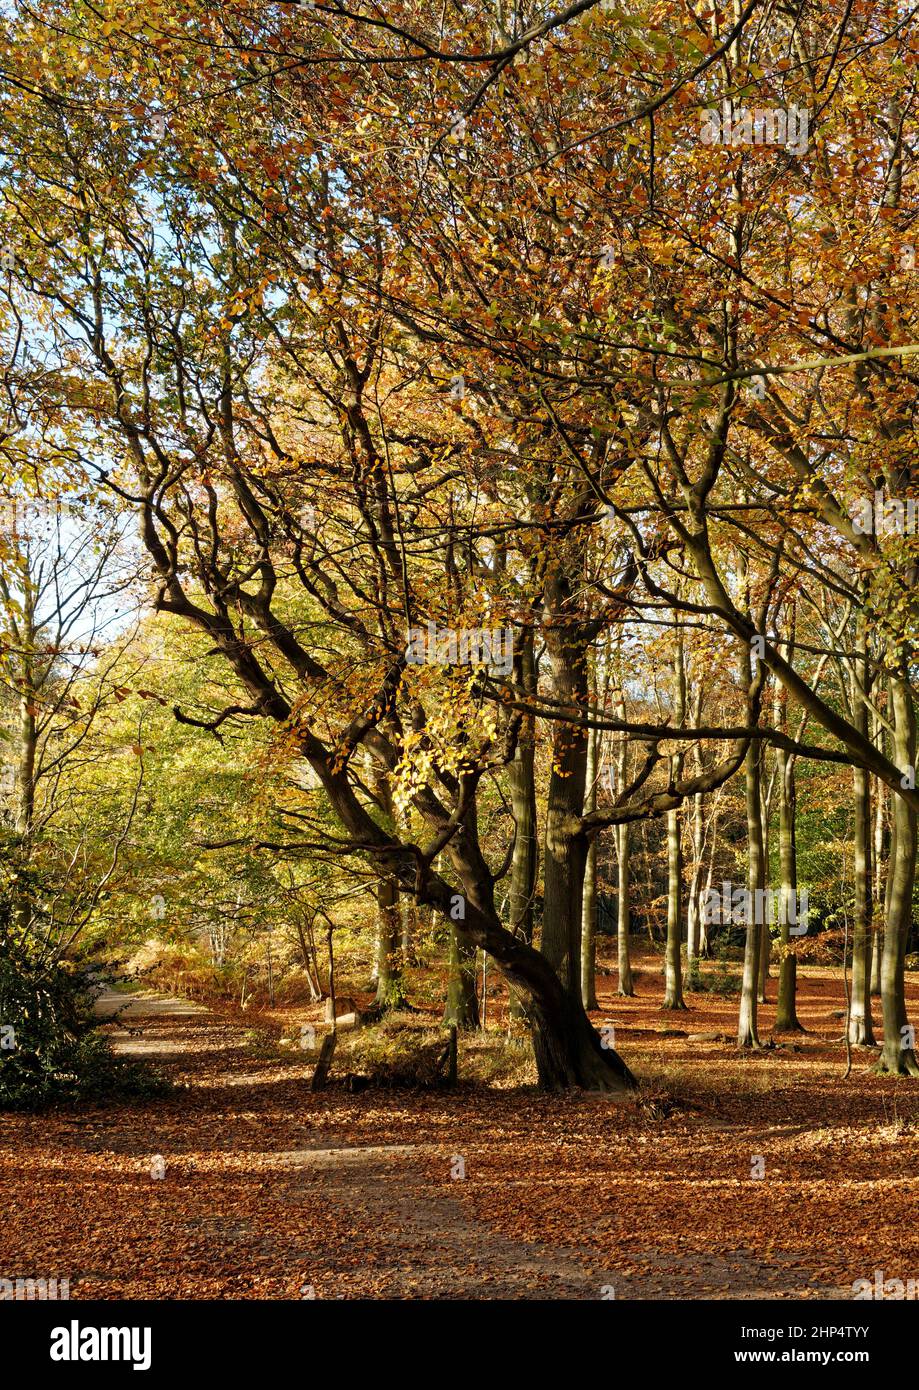 Beech trees in autumn sunshine providing glowing Fall colours in Witton Woods (sometimes called Bacton Woods) near North Walsham, Norfolk. Stock Photo